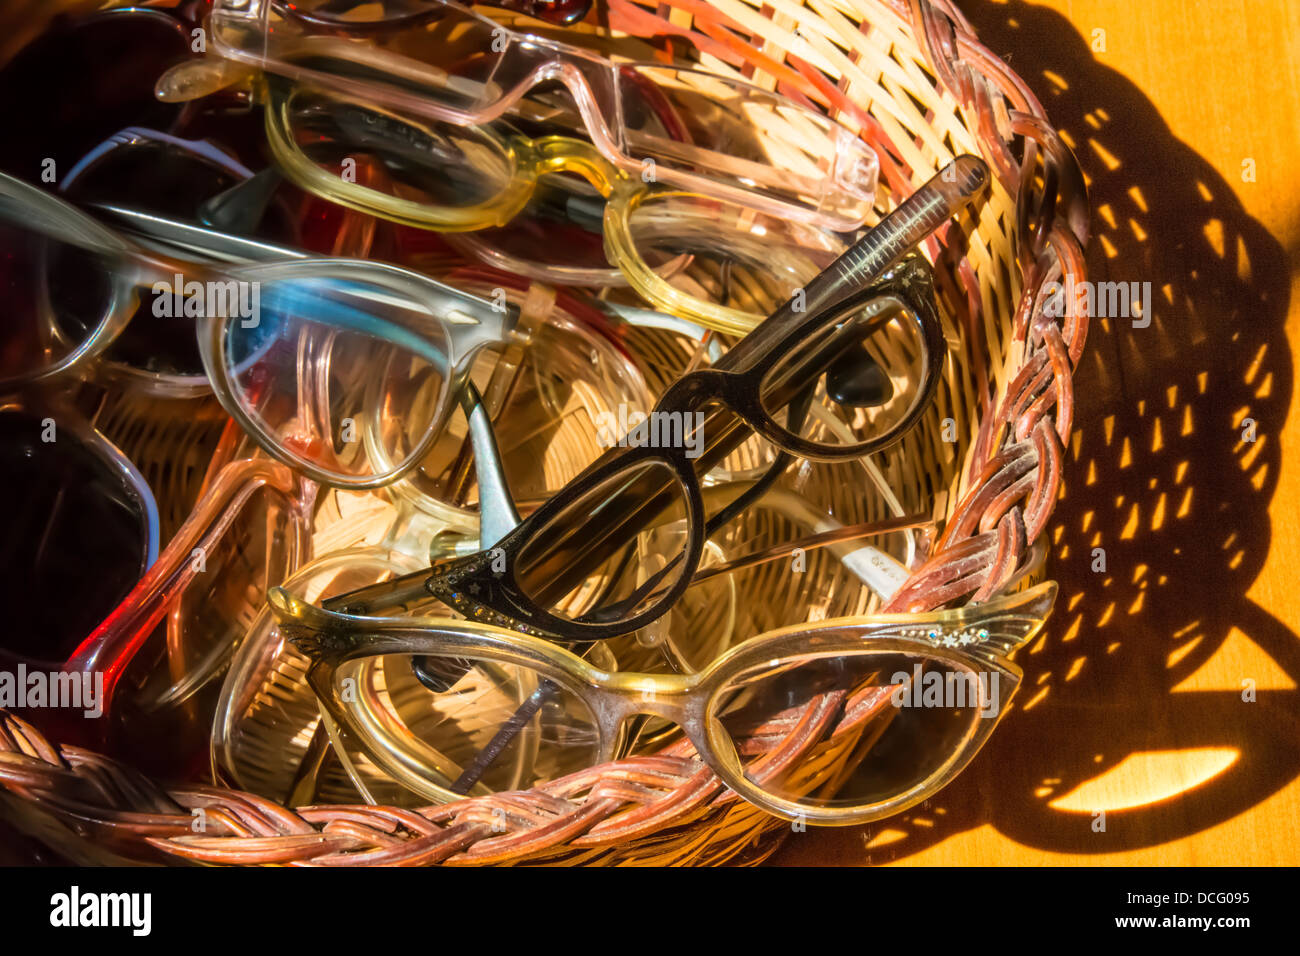 Vintage glasses and sunglasses in a basket Stock Photo